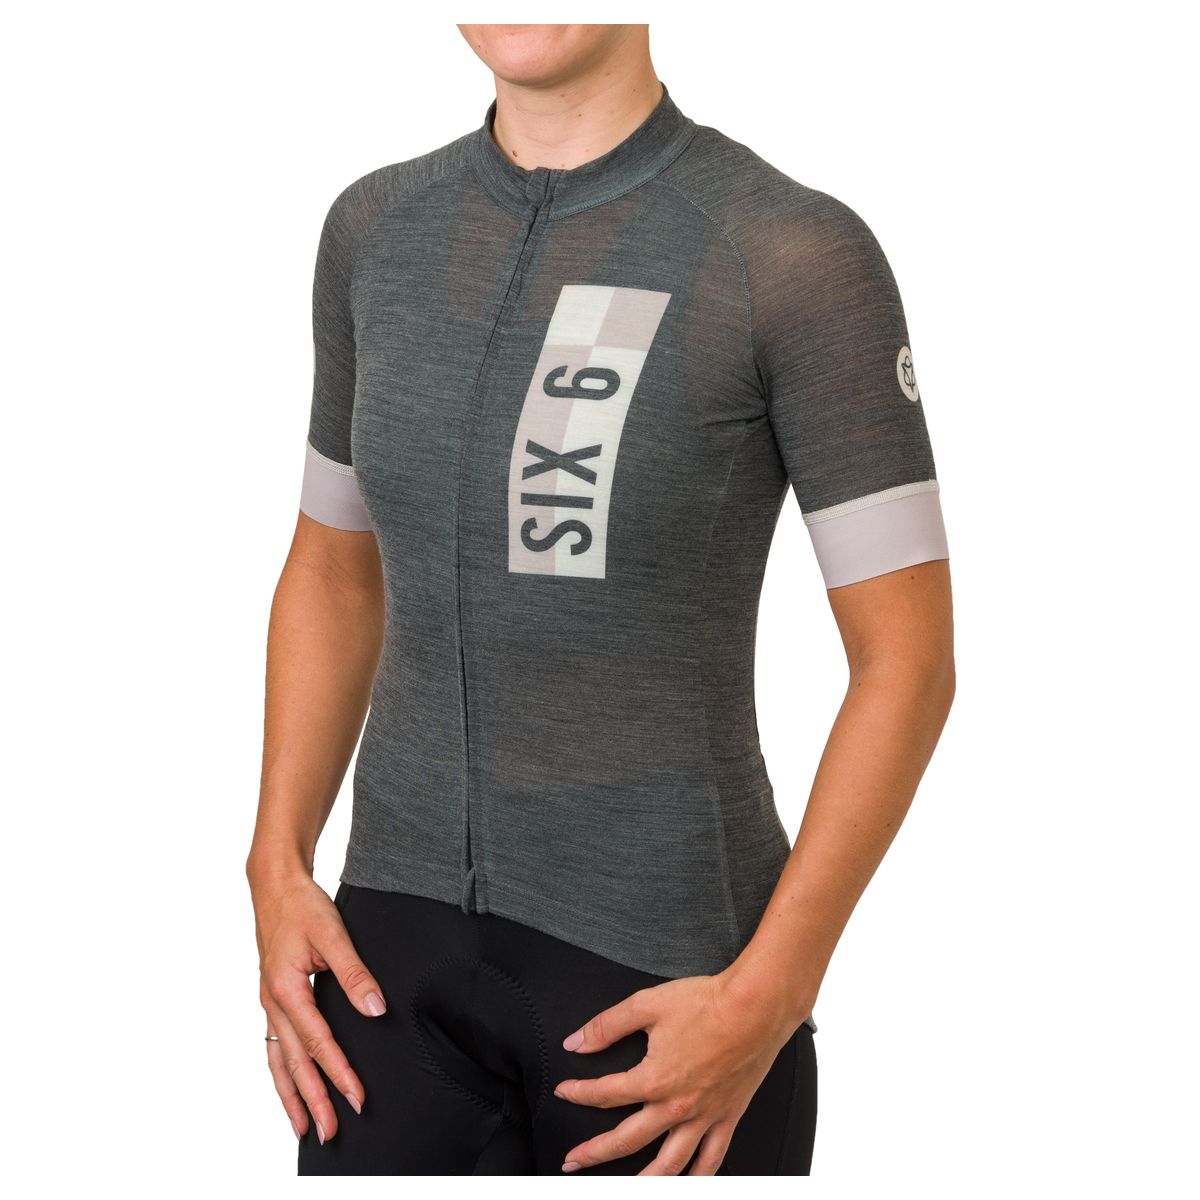 Solid Merino Maillot III SIX6 Mujeres fit example